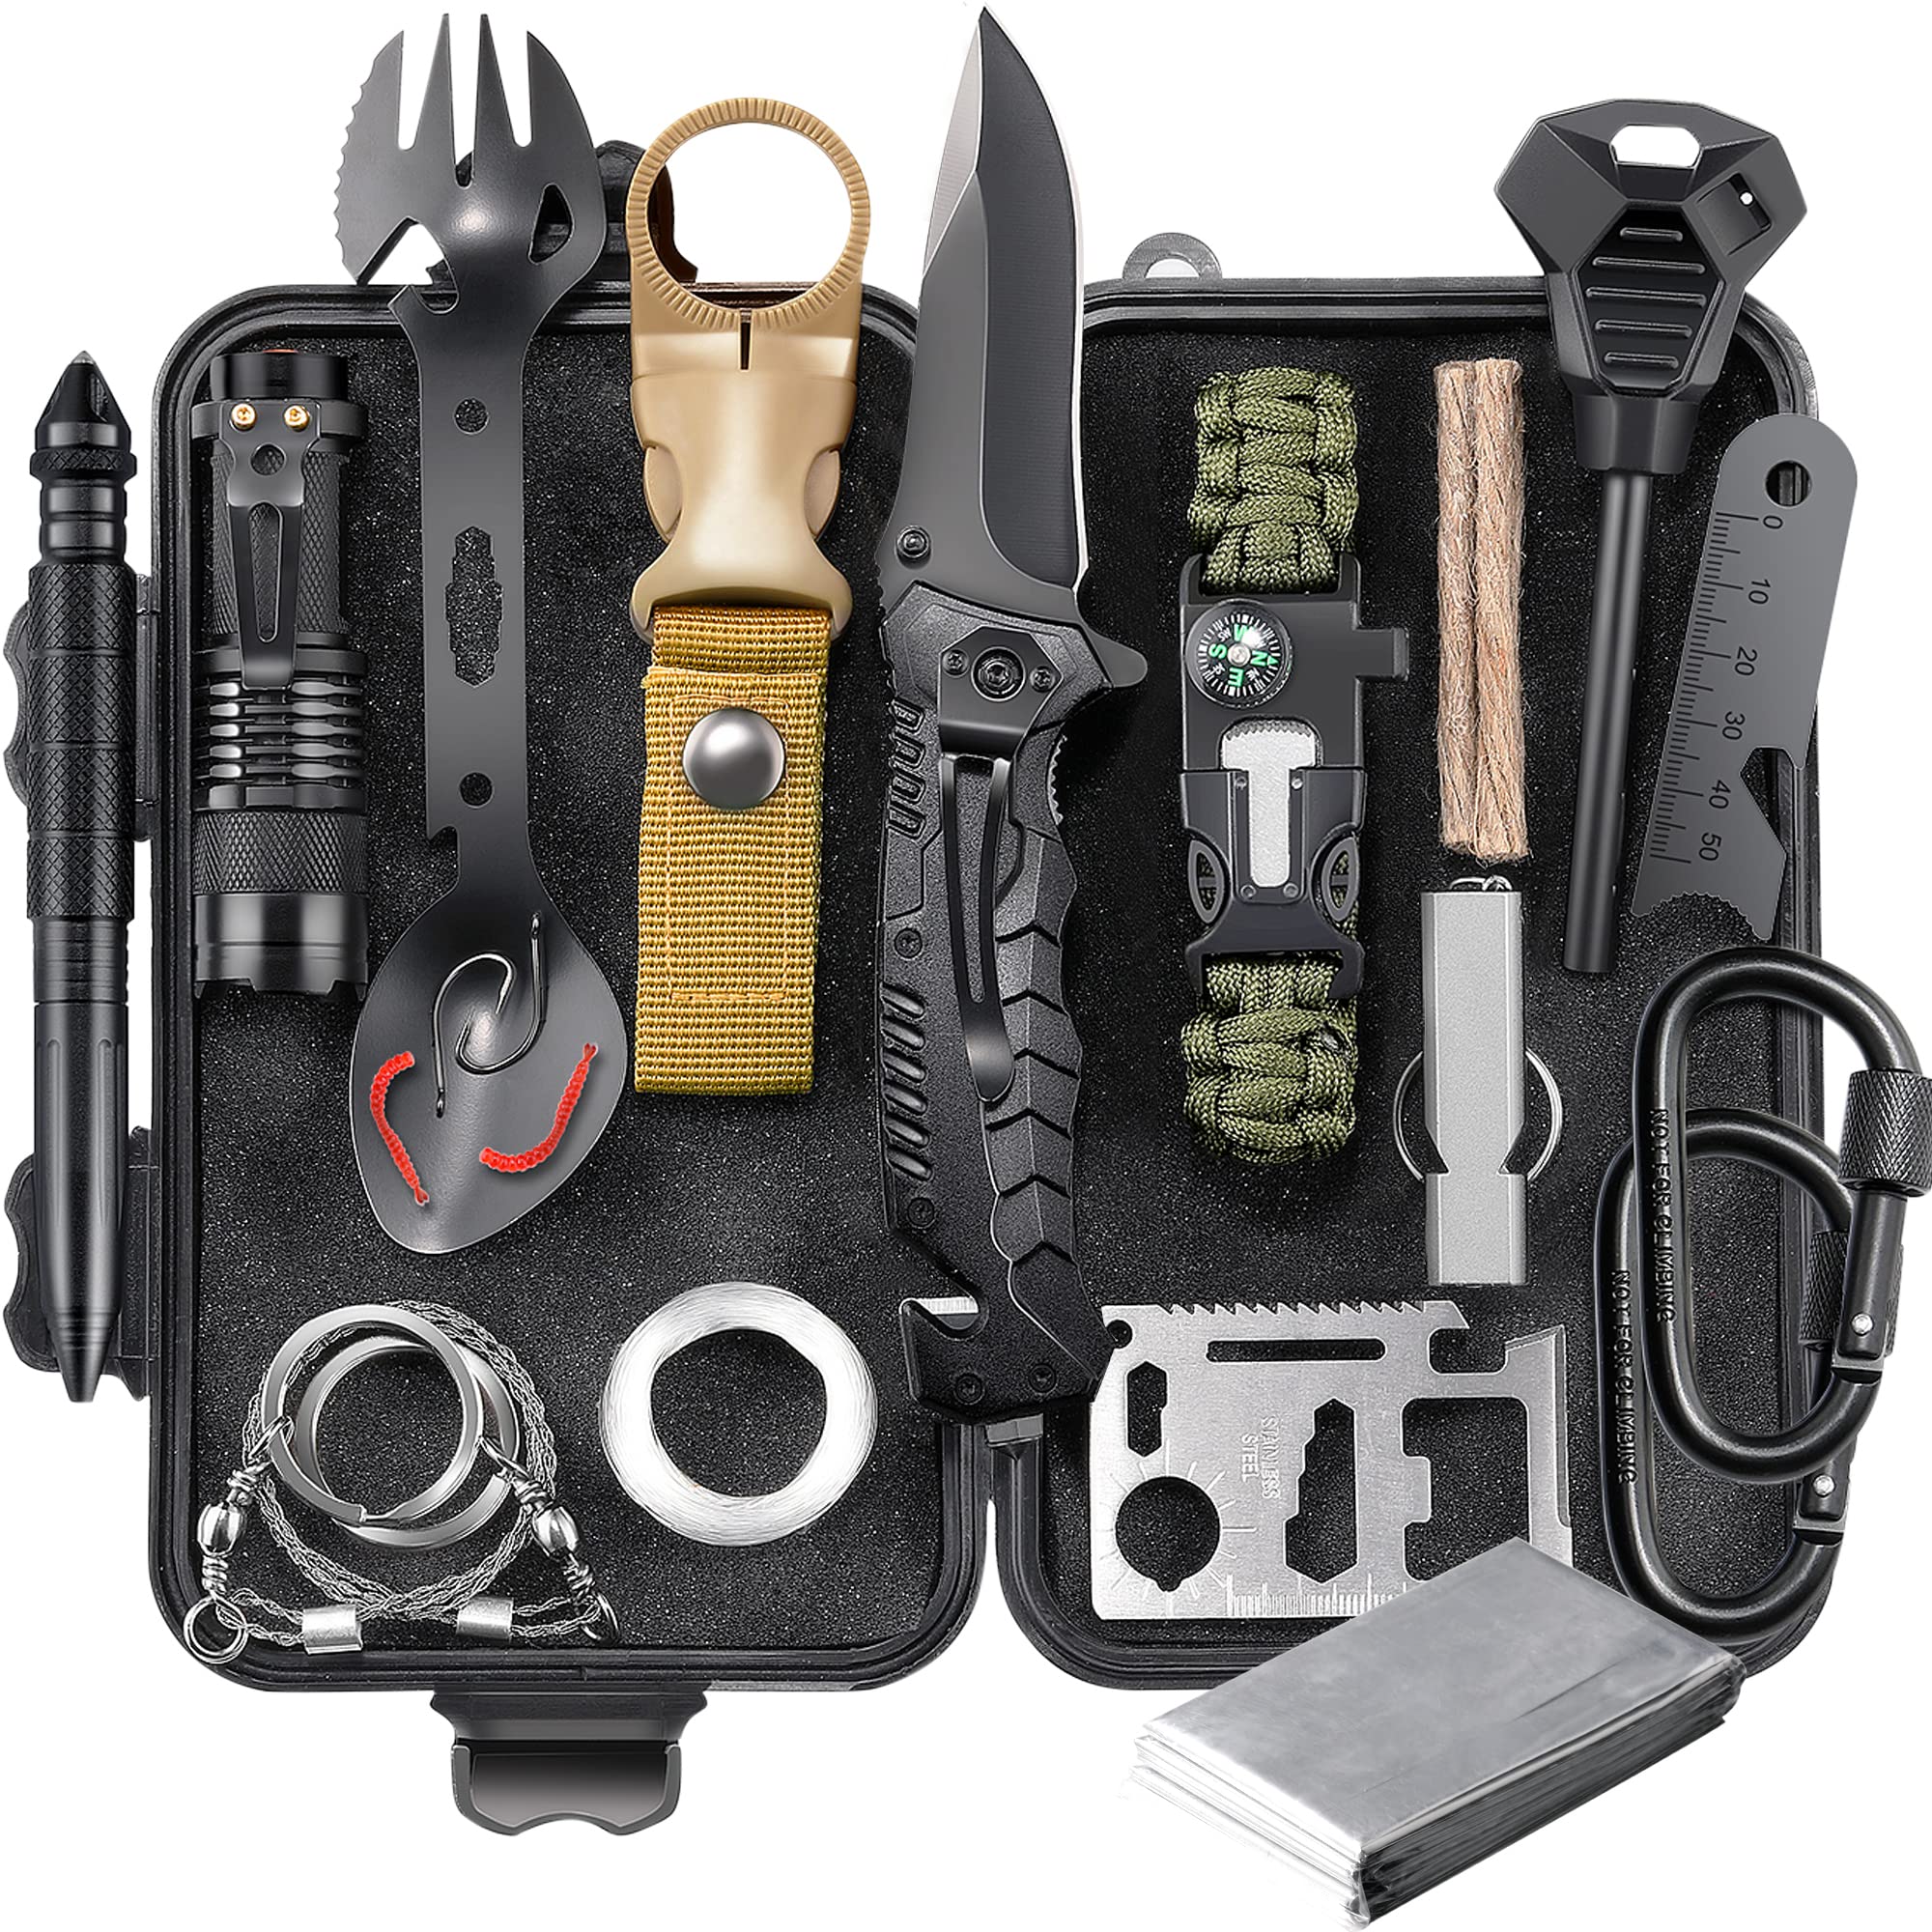 EILIKS Survival Gear, Emergency Survival Kit and Equipment, Gifts